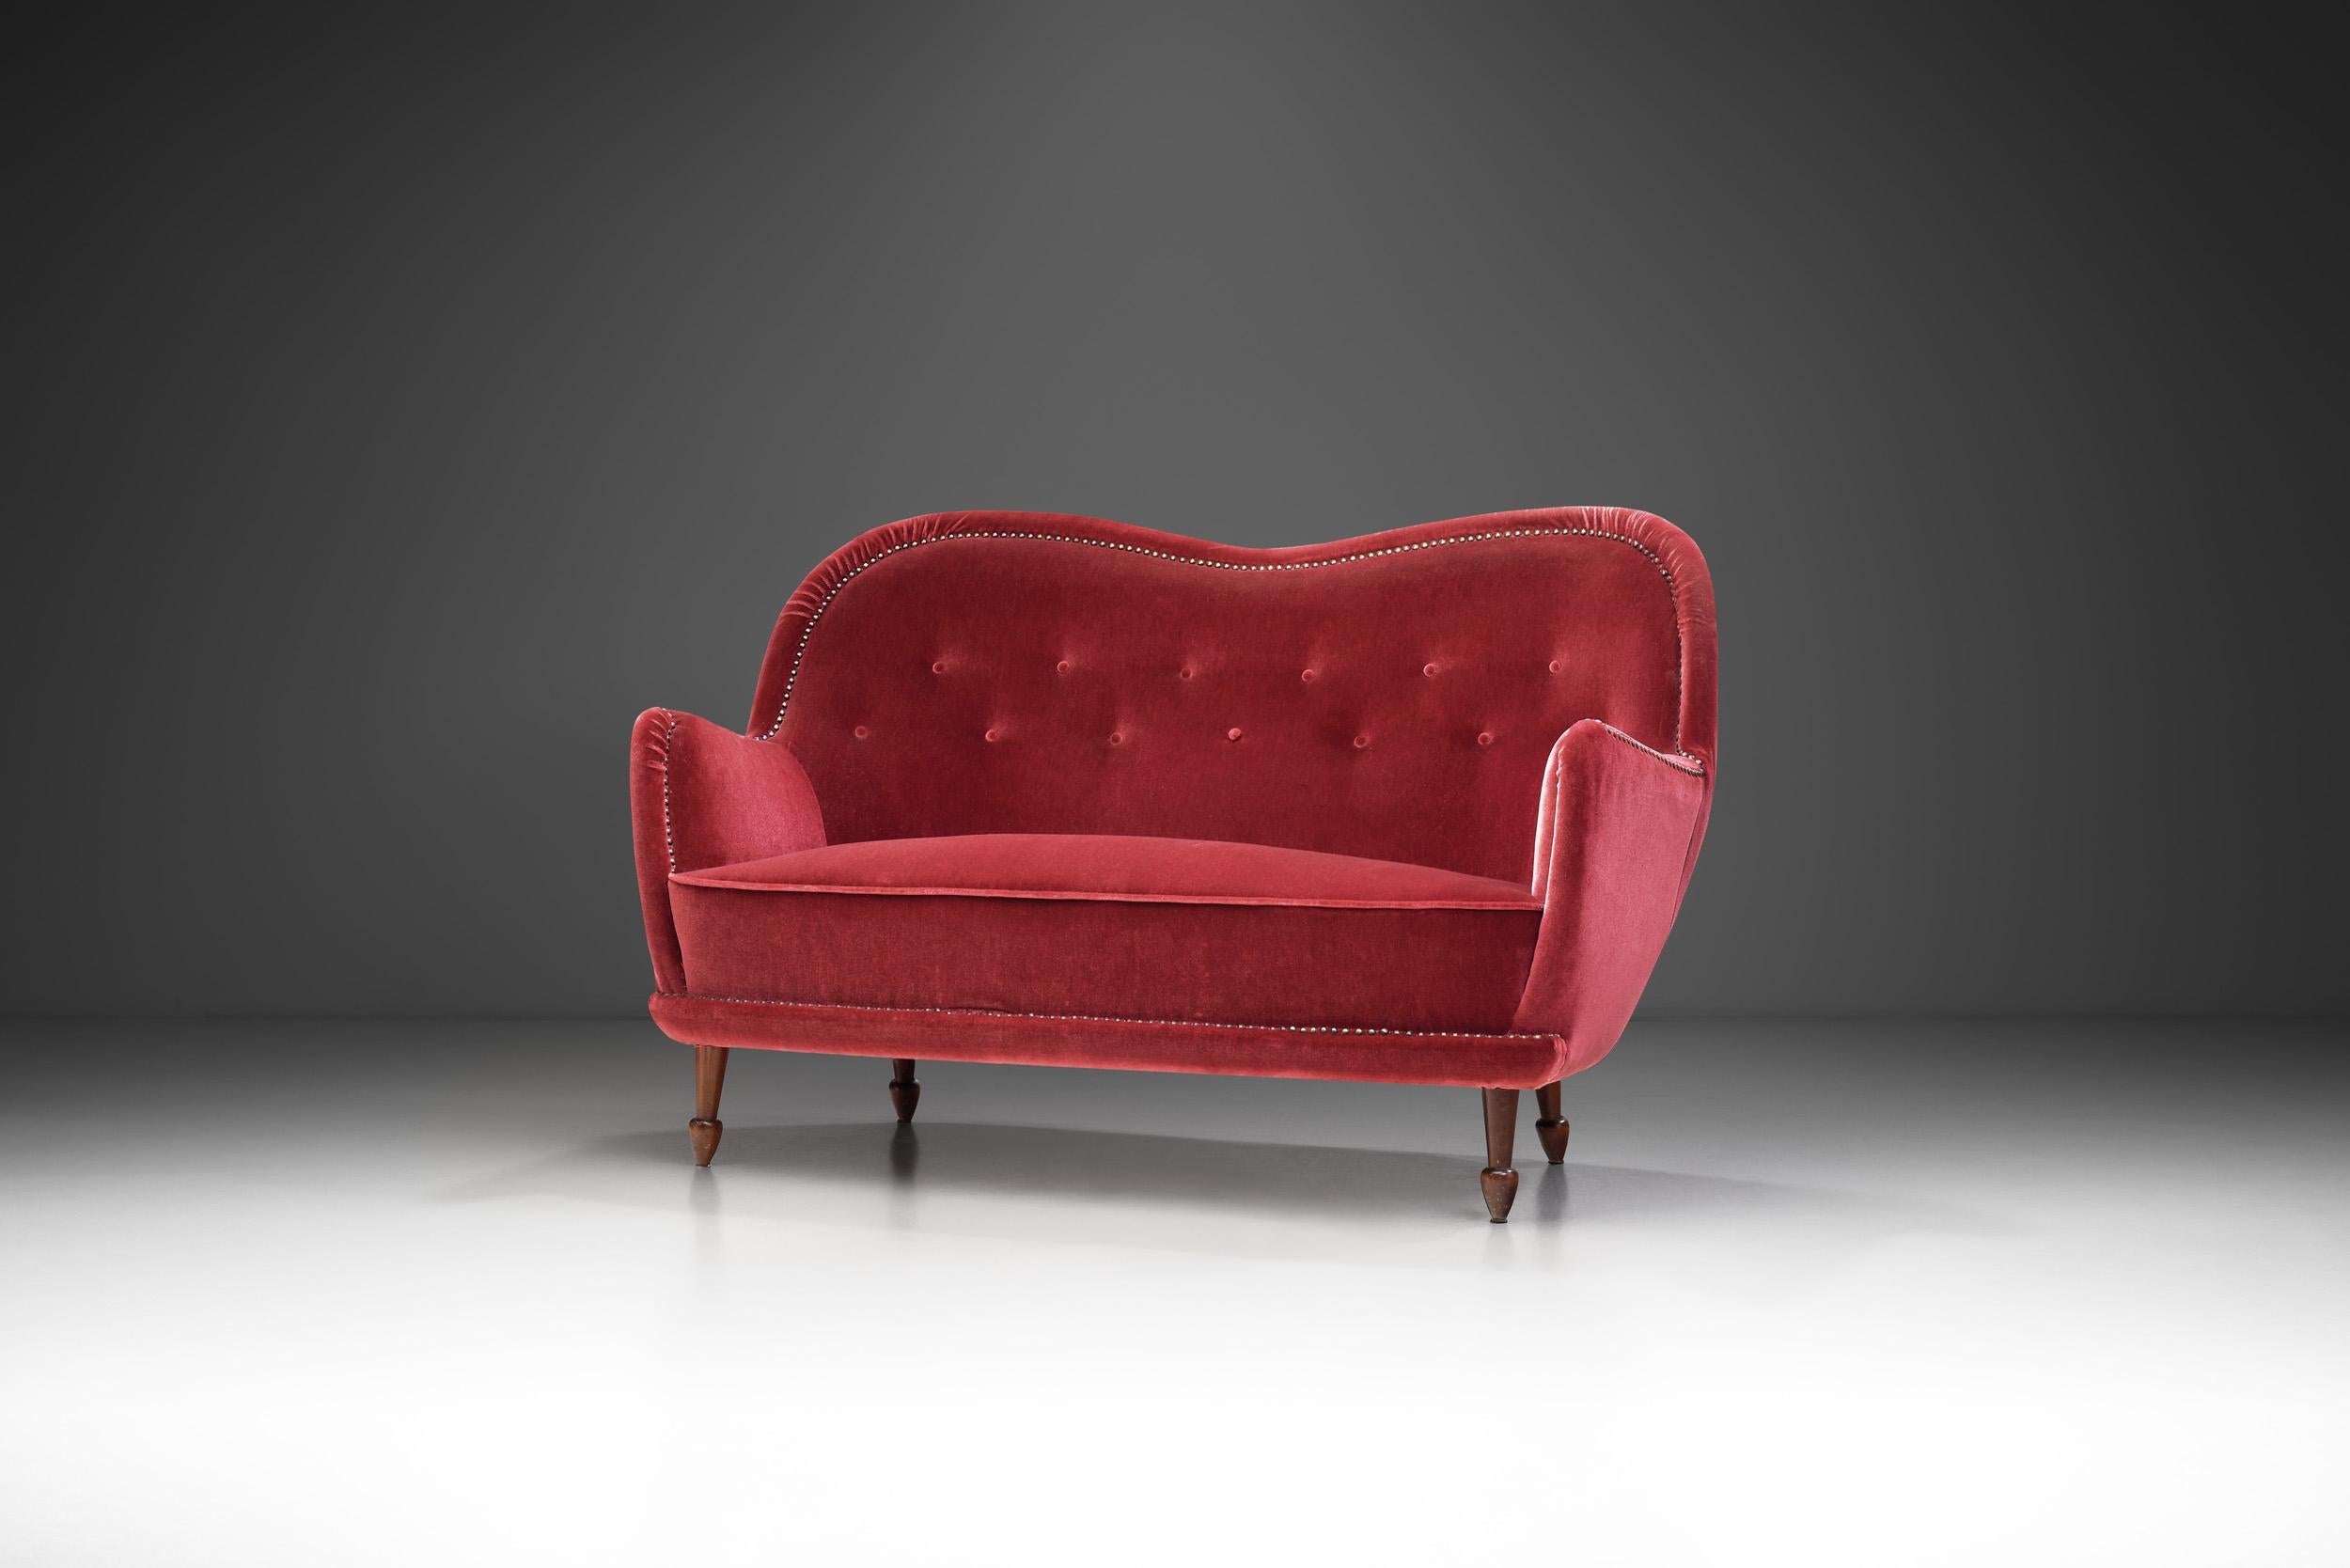 In the realm of mid-20th century Swedish furniture design, Carl Cederholm is known as a furniture designer who favoured the classic elegance of Swedish furniture design and combined it with modern elements. This characteristic sofa from the 1940s